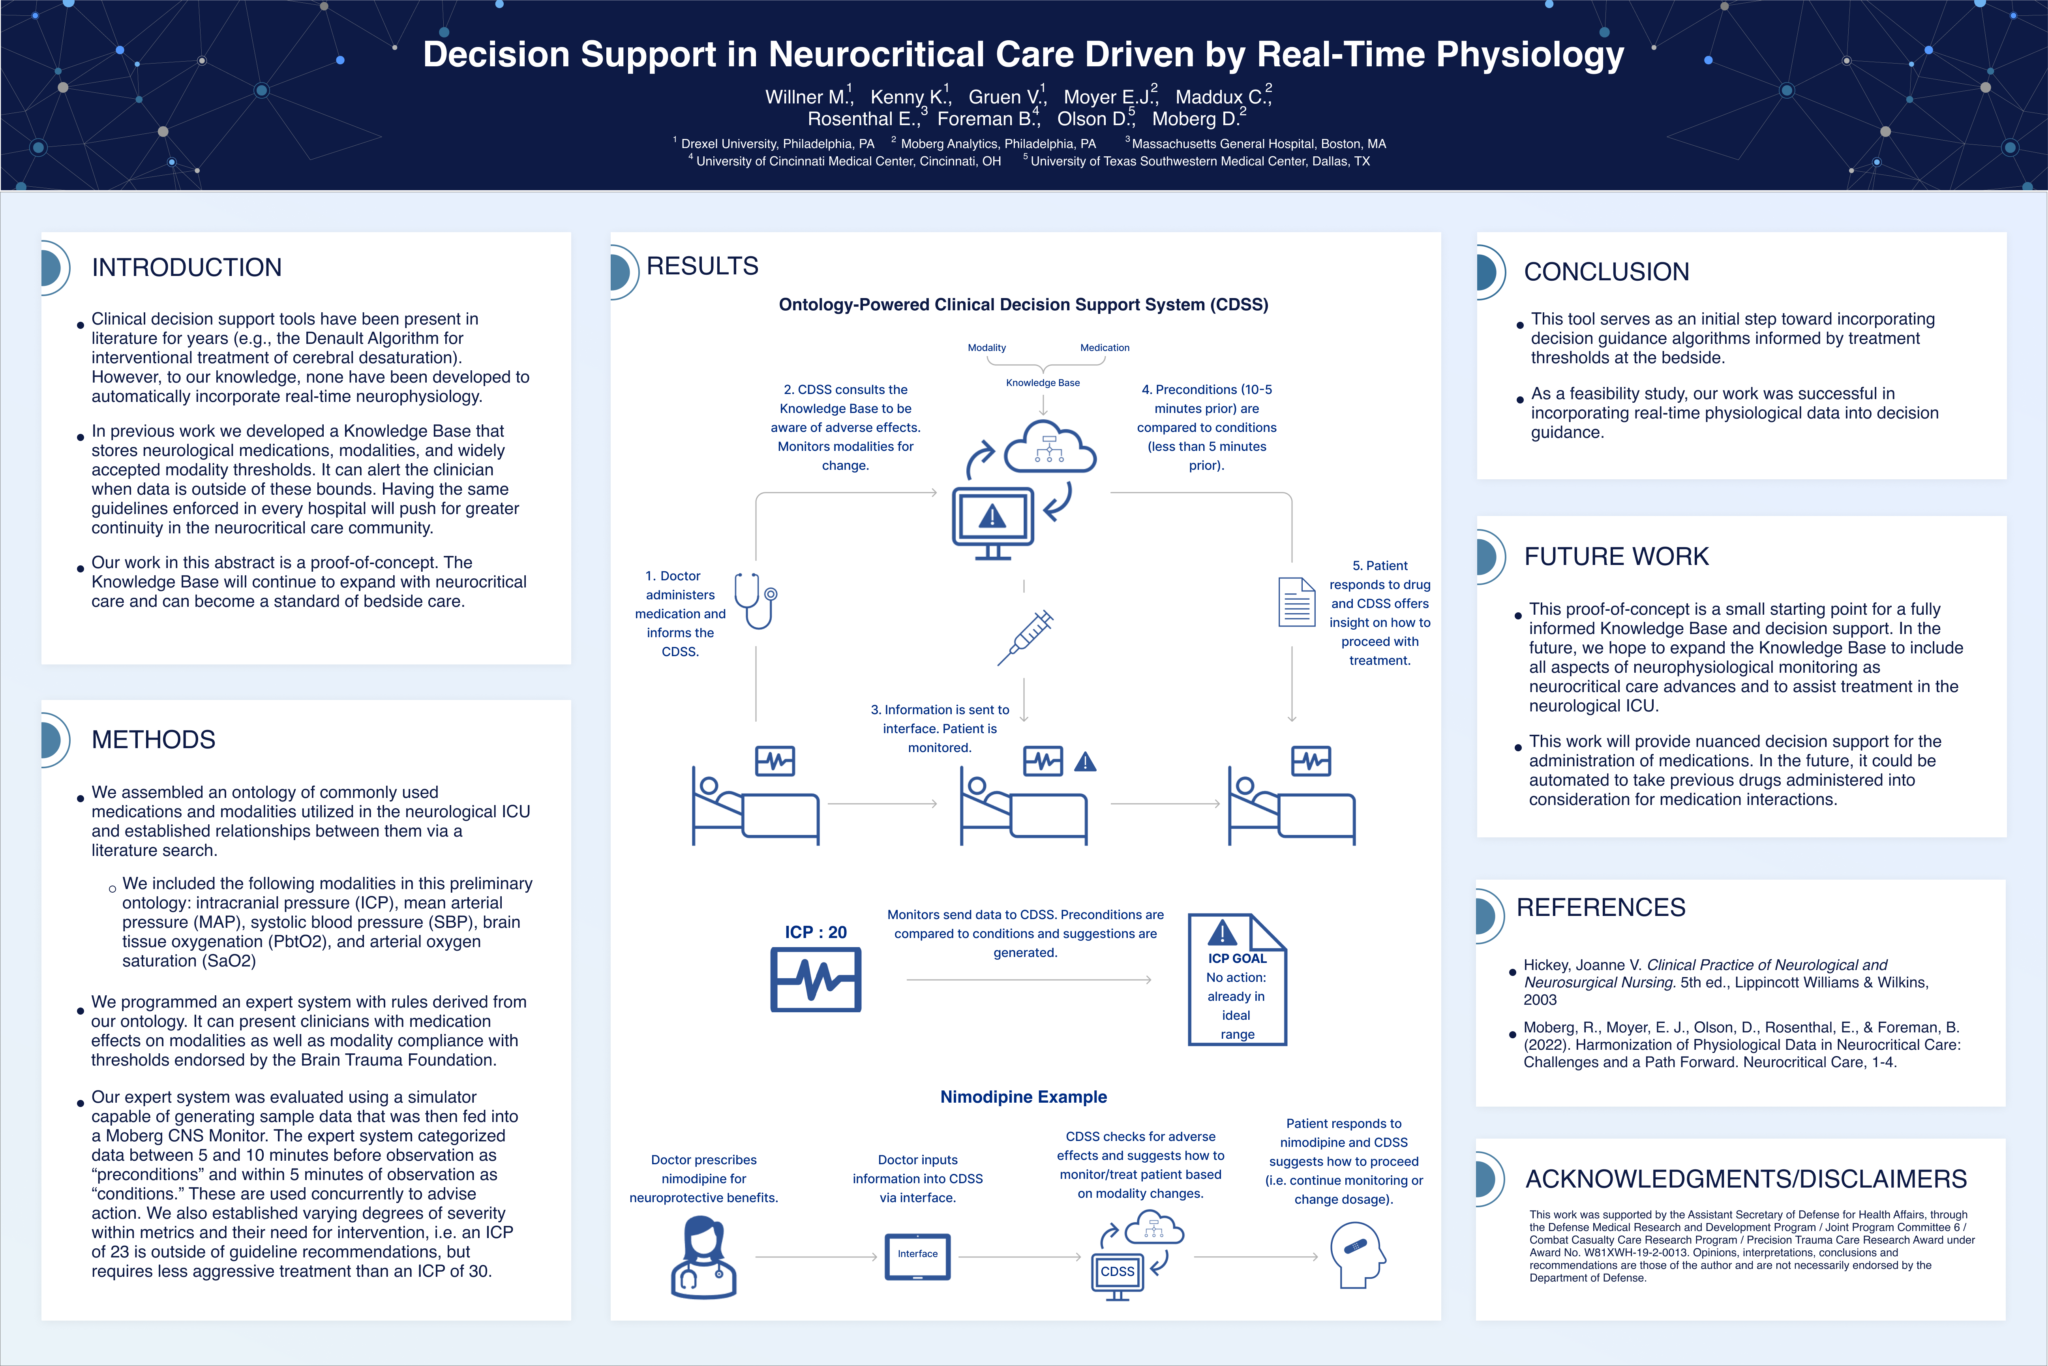 Decision Support in Neurocritical Care Driven by Real-Time Physiology